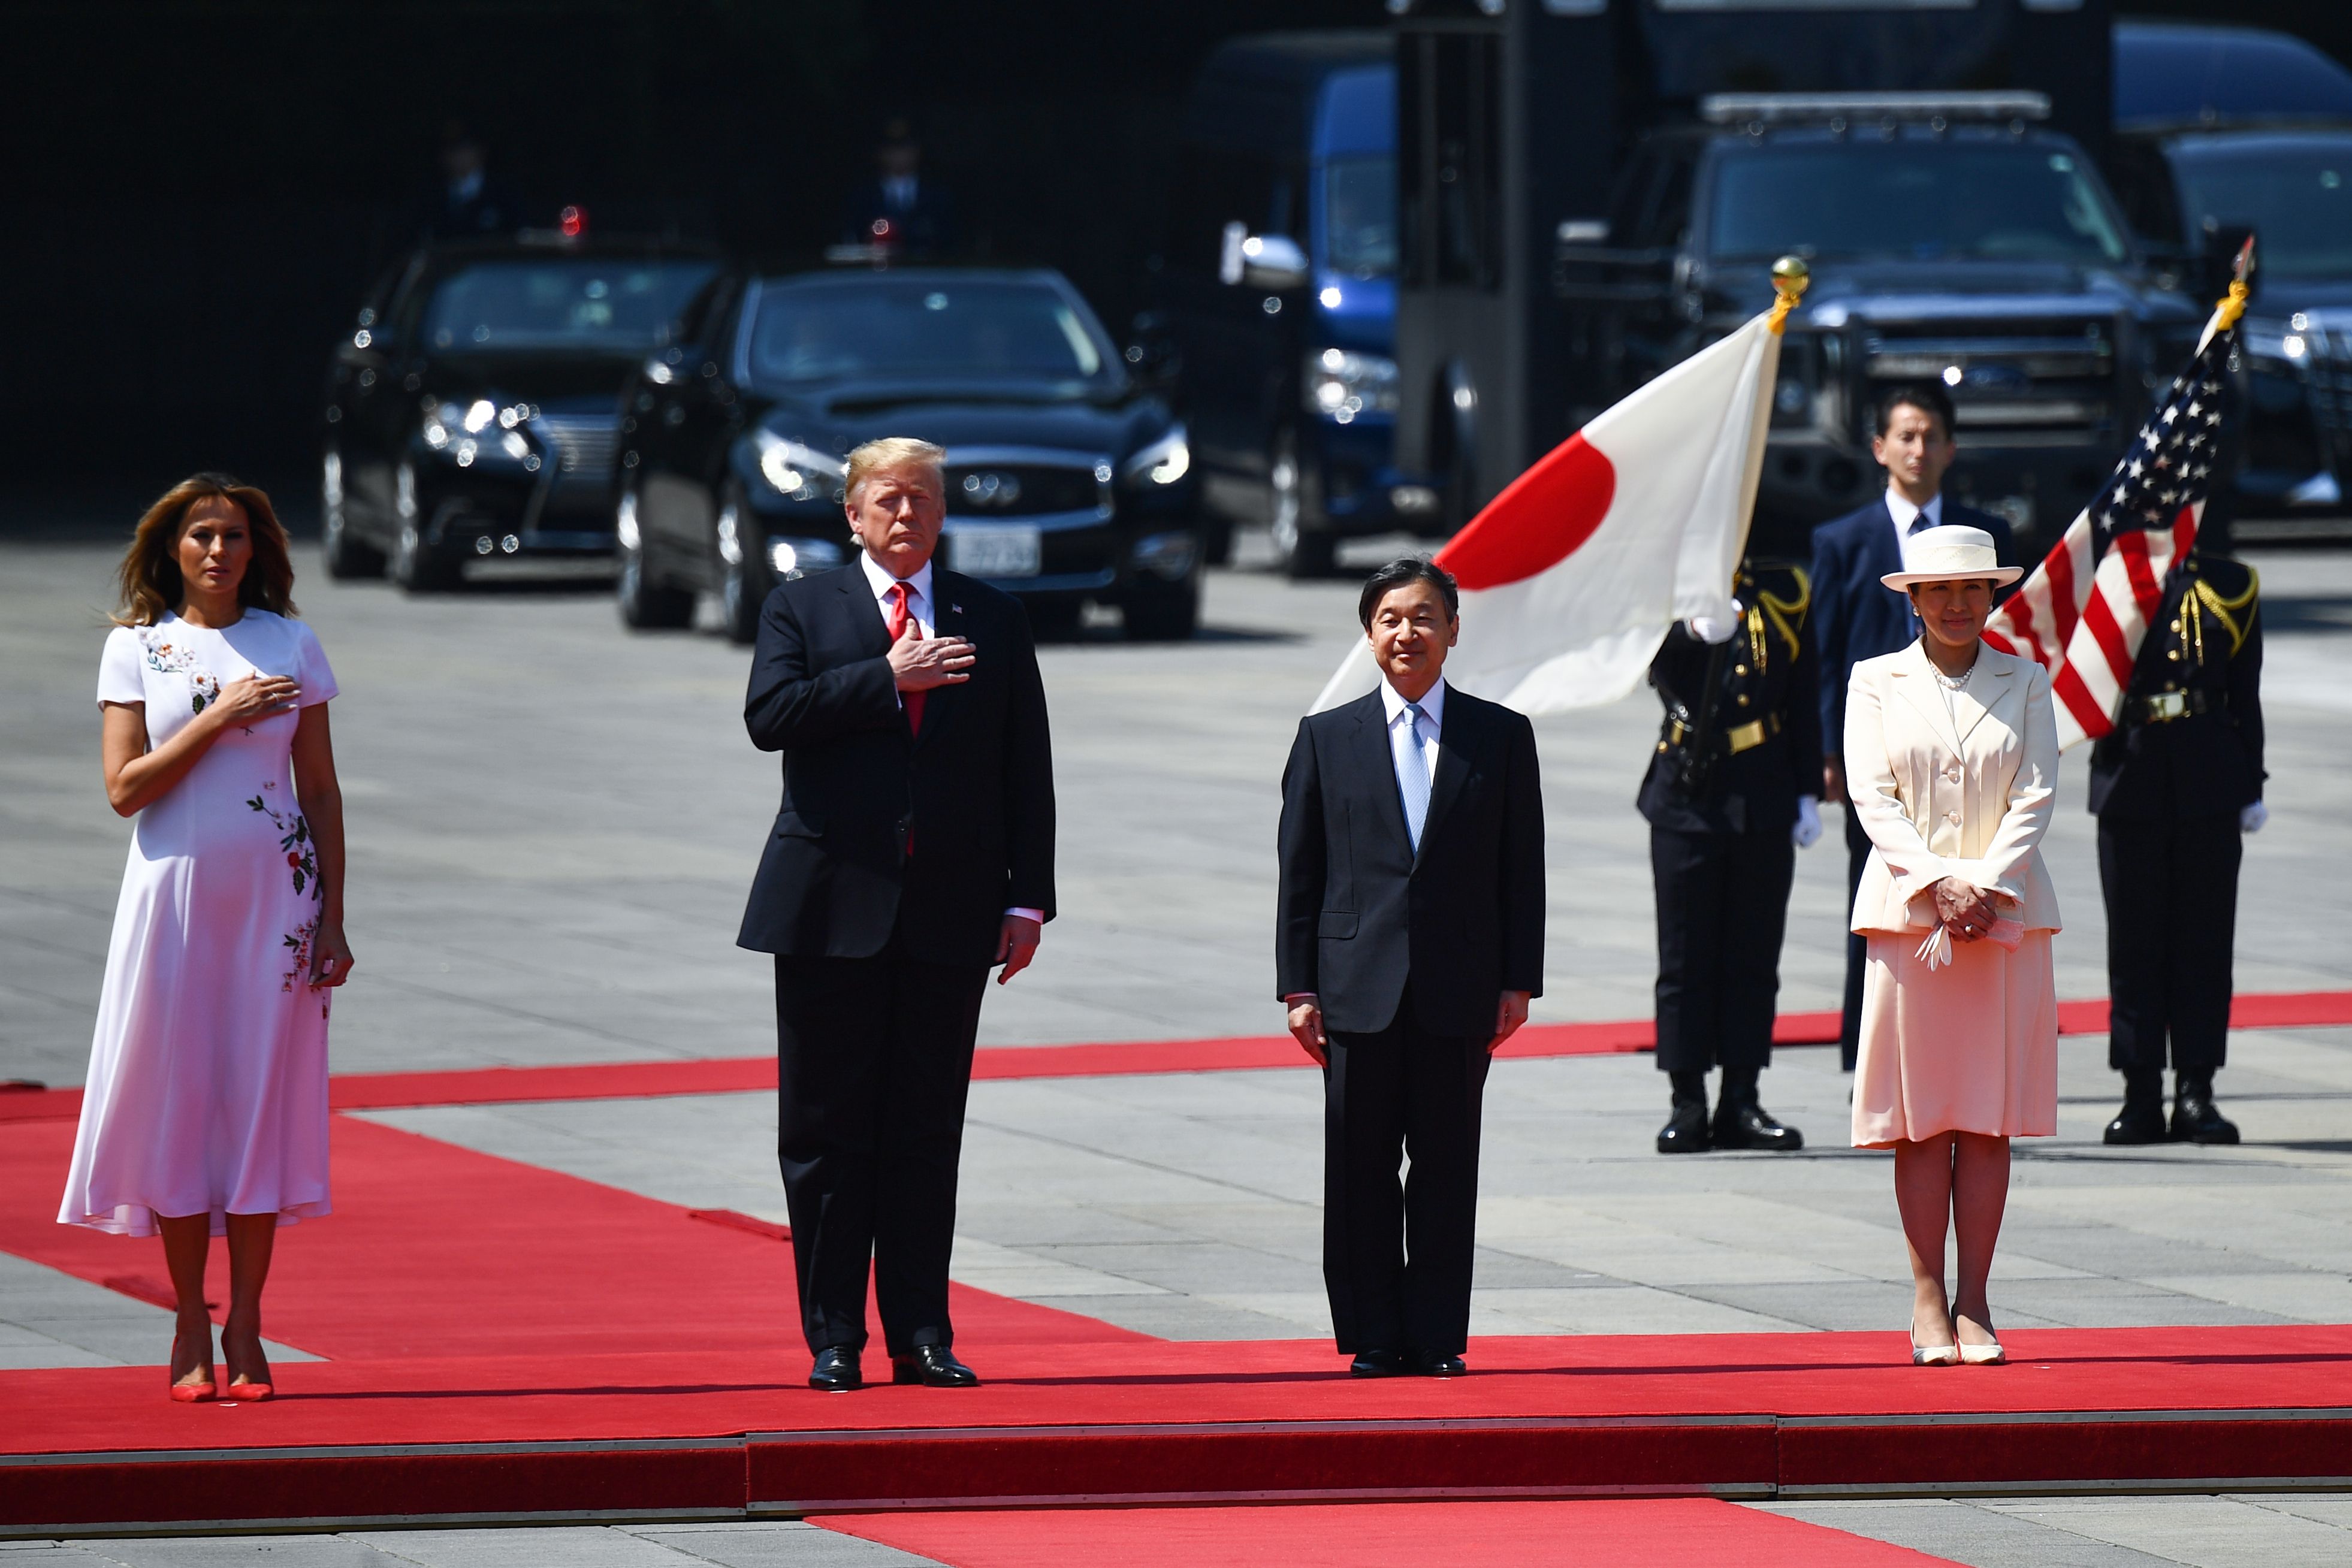 (L-R) US First Lady Melania Trump, US President Donald Trump, Japan's Emperor Naruhito and Empress Masako attend a welcome ceremony at the Imperial Palace in Tokyo on May 27, 2019. (Photo by BRENDAN SMIALOWSKI/AFP/Getty Images)